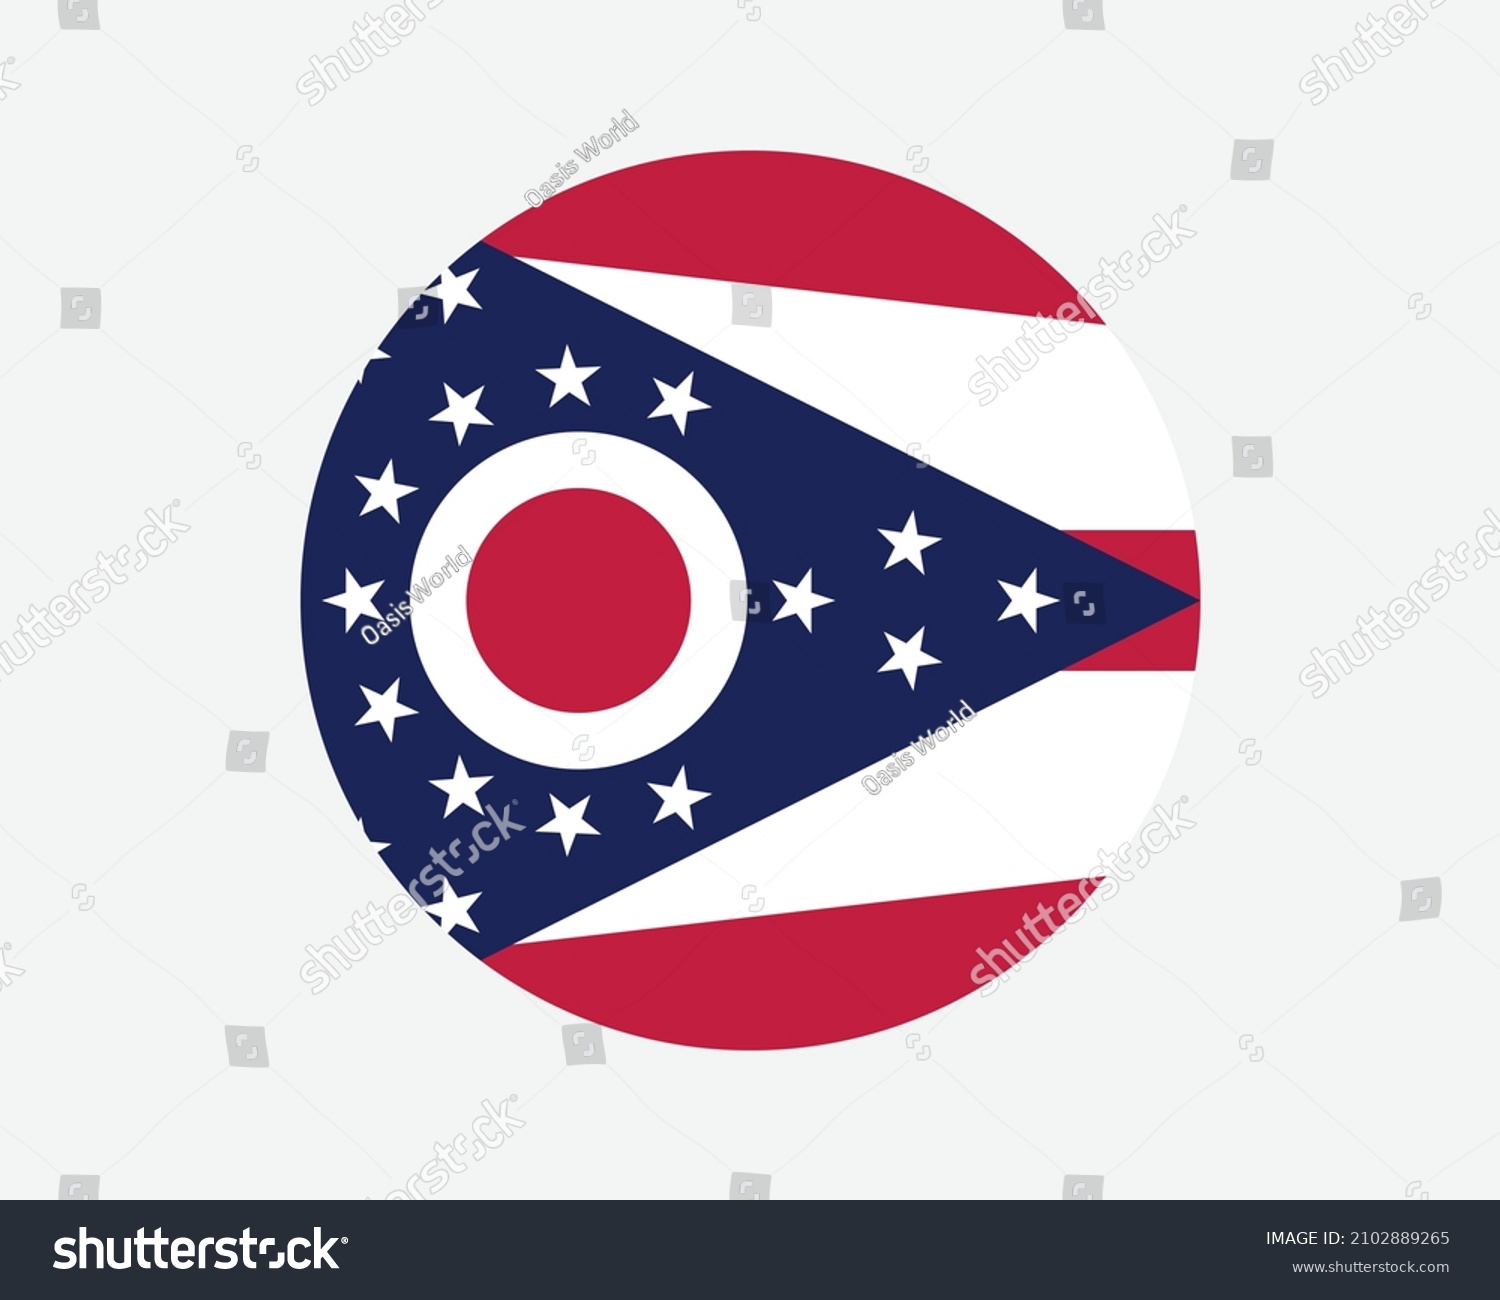 SVG of Ohio USA Round State Flag. OH, US Circle Flag. State of Ohio, United States of America Circular Shape Button Banner. EPS Vector Illustration. svg